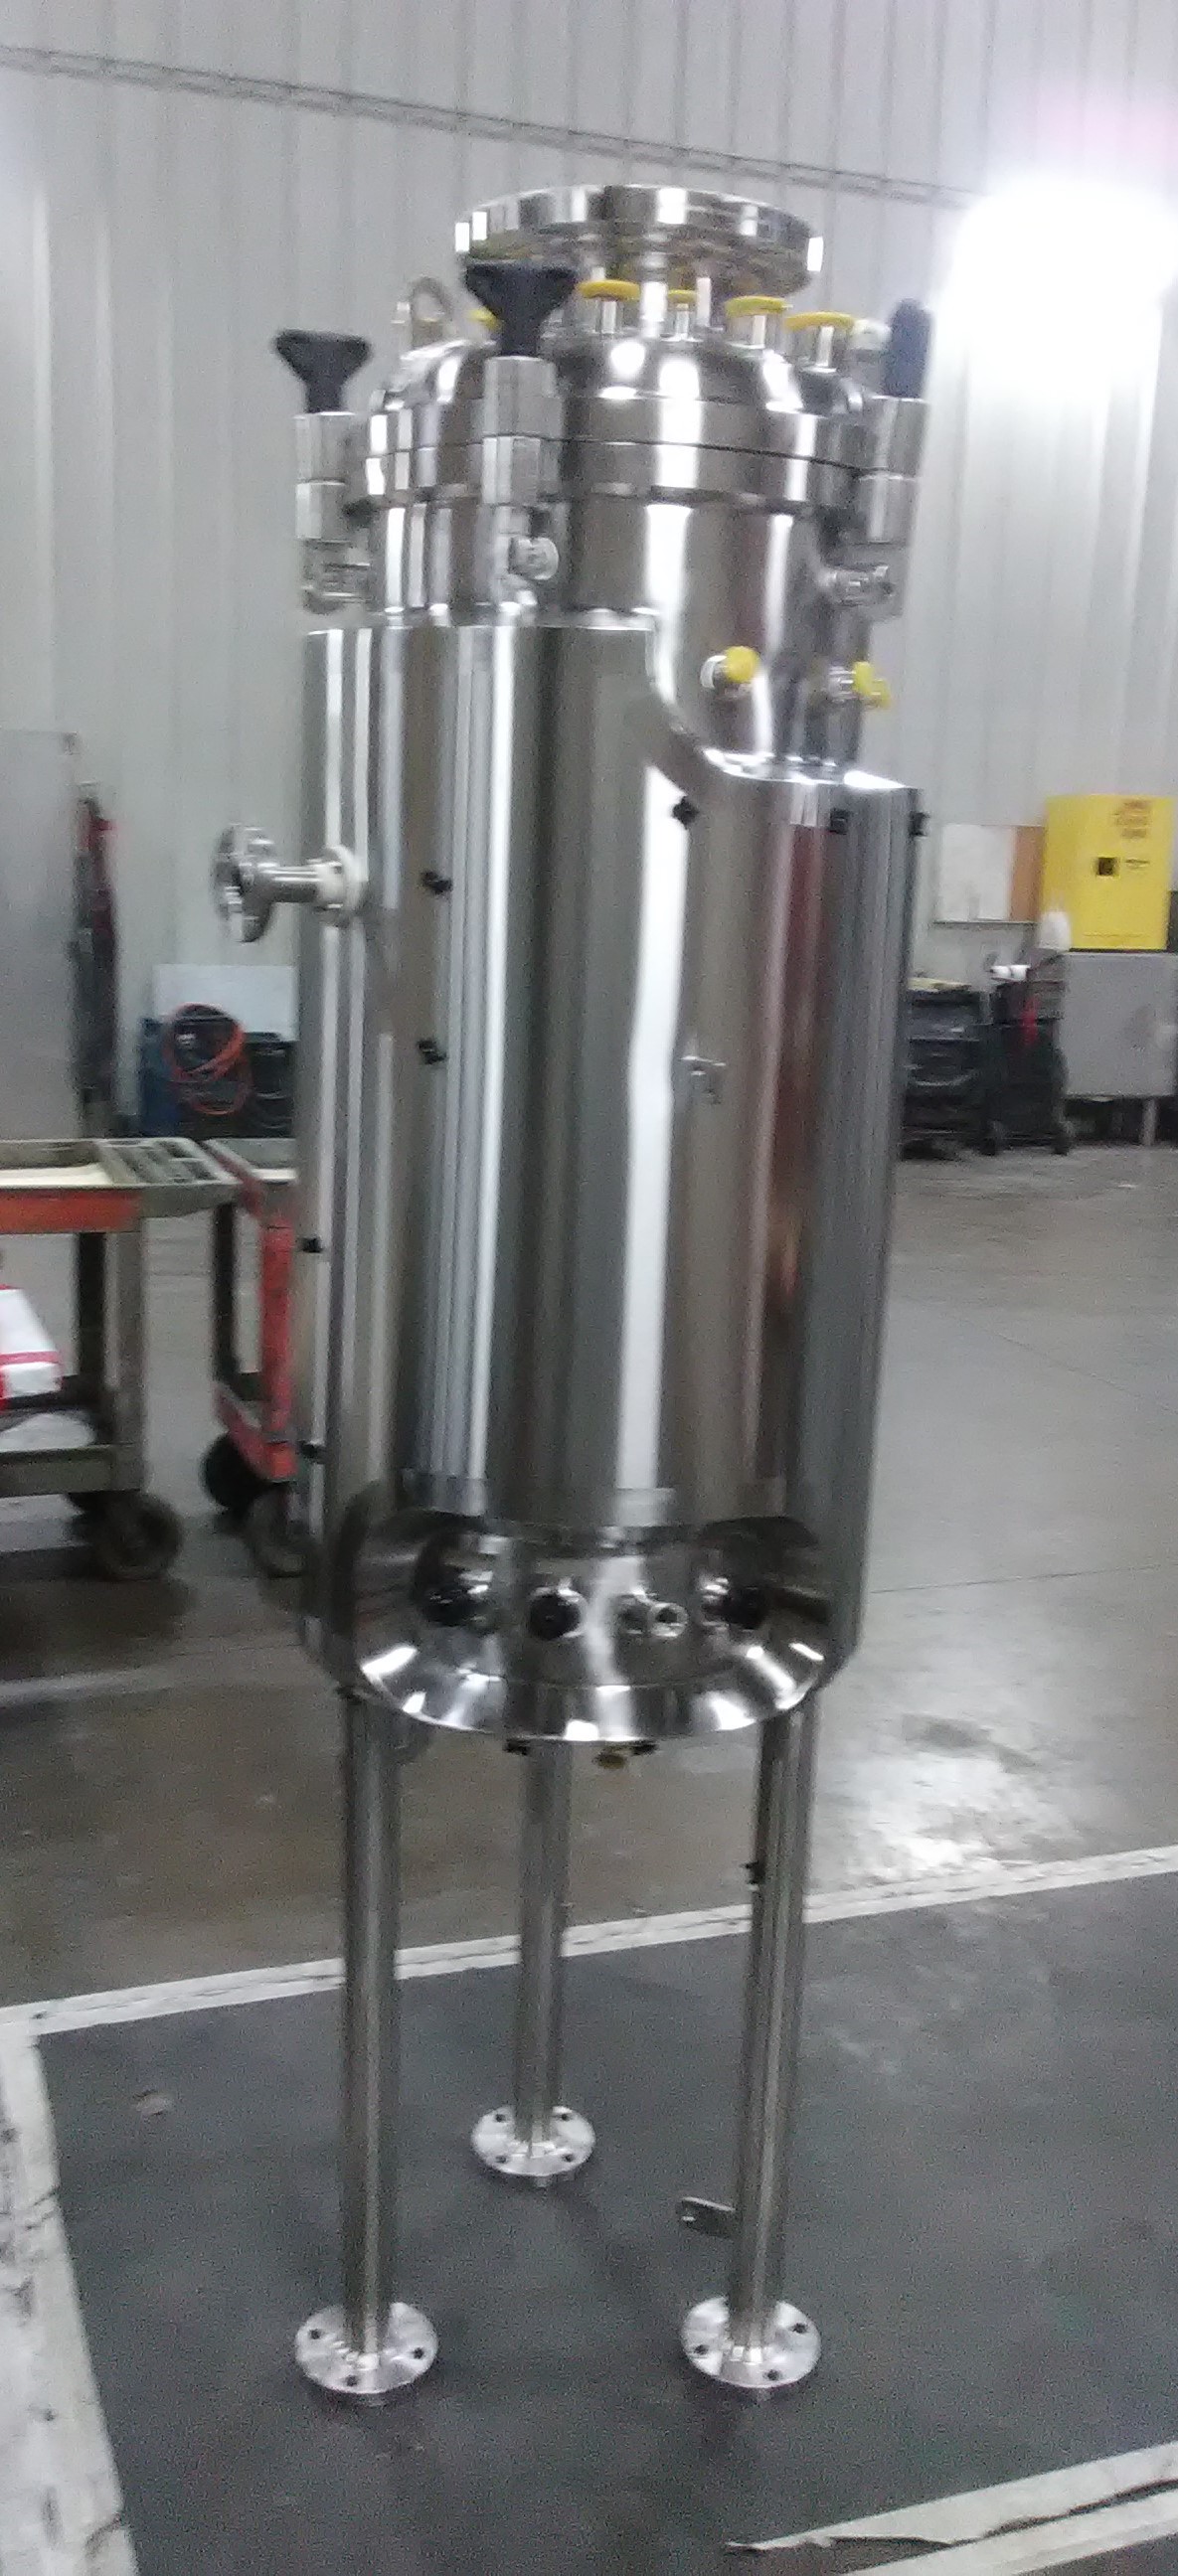 (4) UNUSED 245 Liter (65 Gallon) 316L Sanitary Stainless Steel Jacketed Reactor/Fermenter. Built By Stainless Technology. Internal rated 60/FV PSI @ 350 Deg. F. Jacket rated 150/FV PSI @ 350 Deg. F. Outlet Valves Included. 20